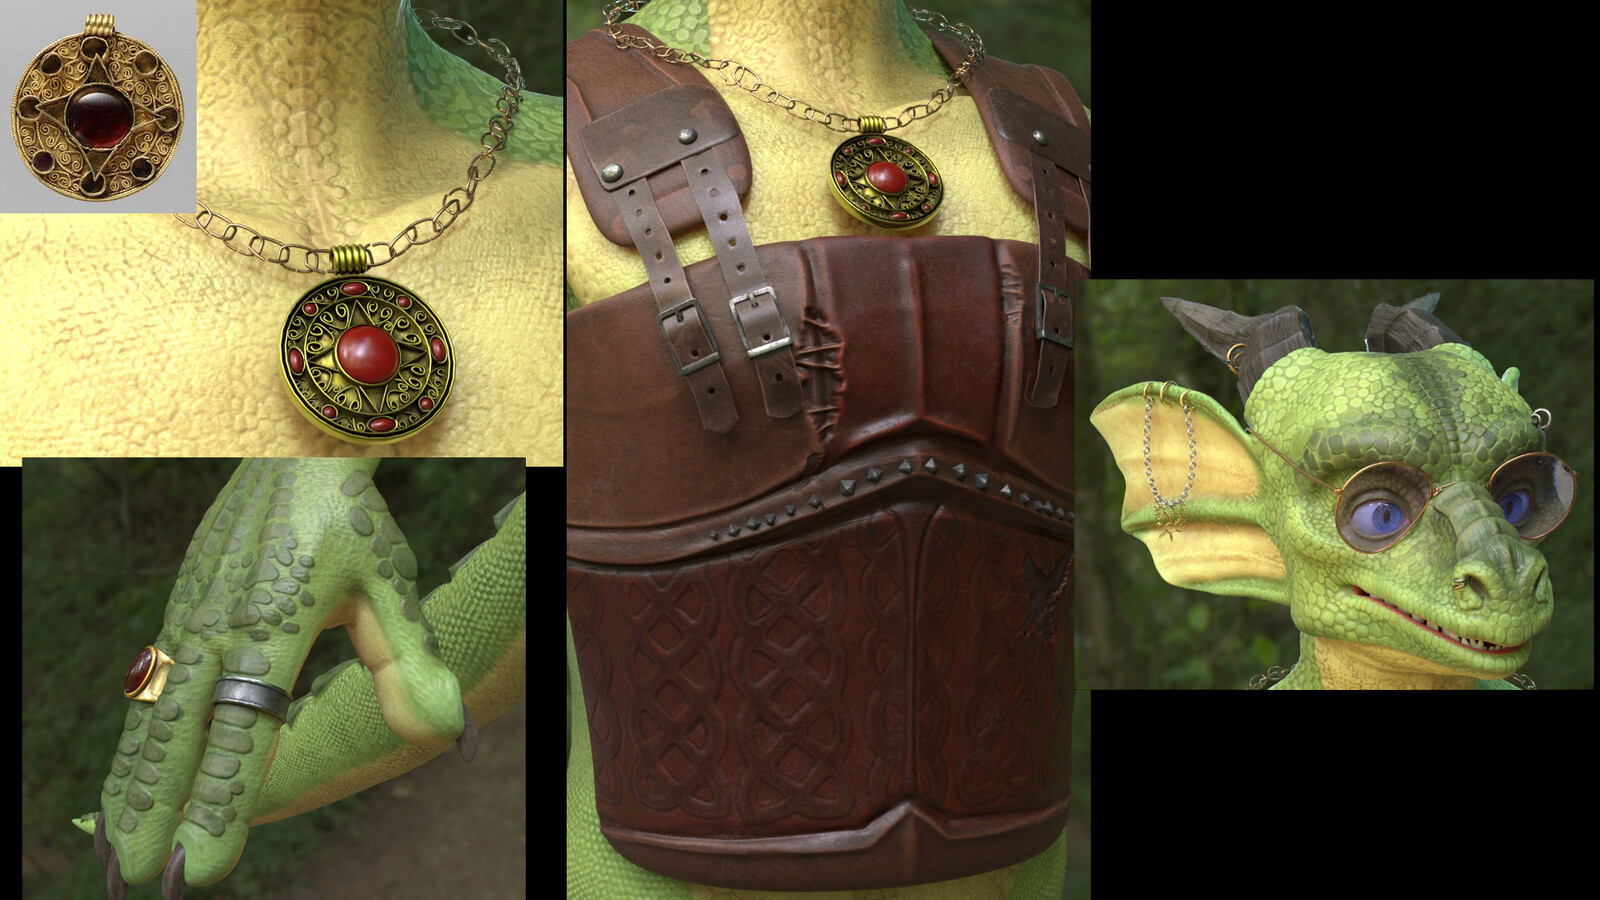 The next step was to focus on the accessories and materials of his armor to make them feel right.  The necklace was based on a reference I found when researching medieval jewelry (pictured).